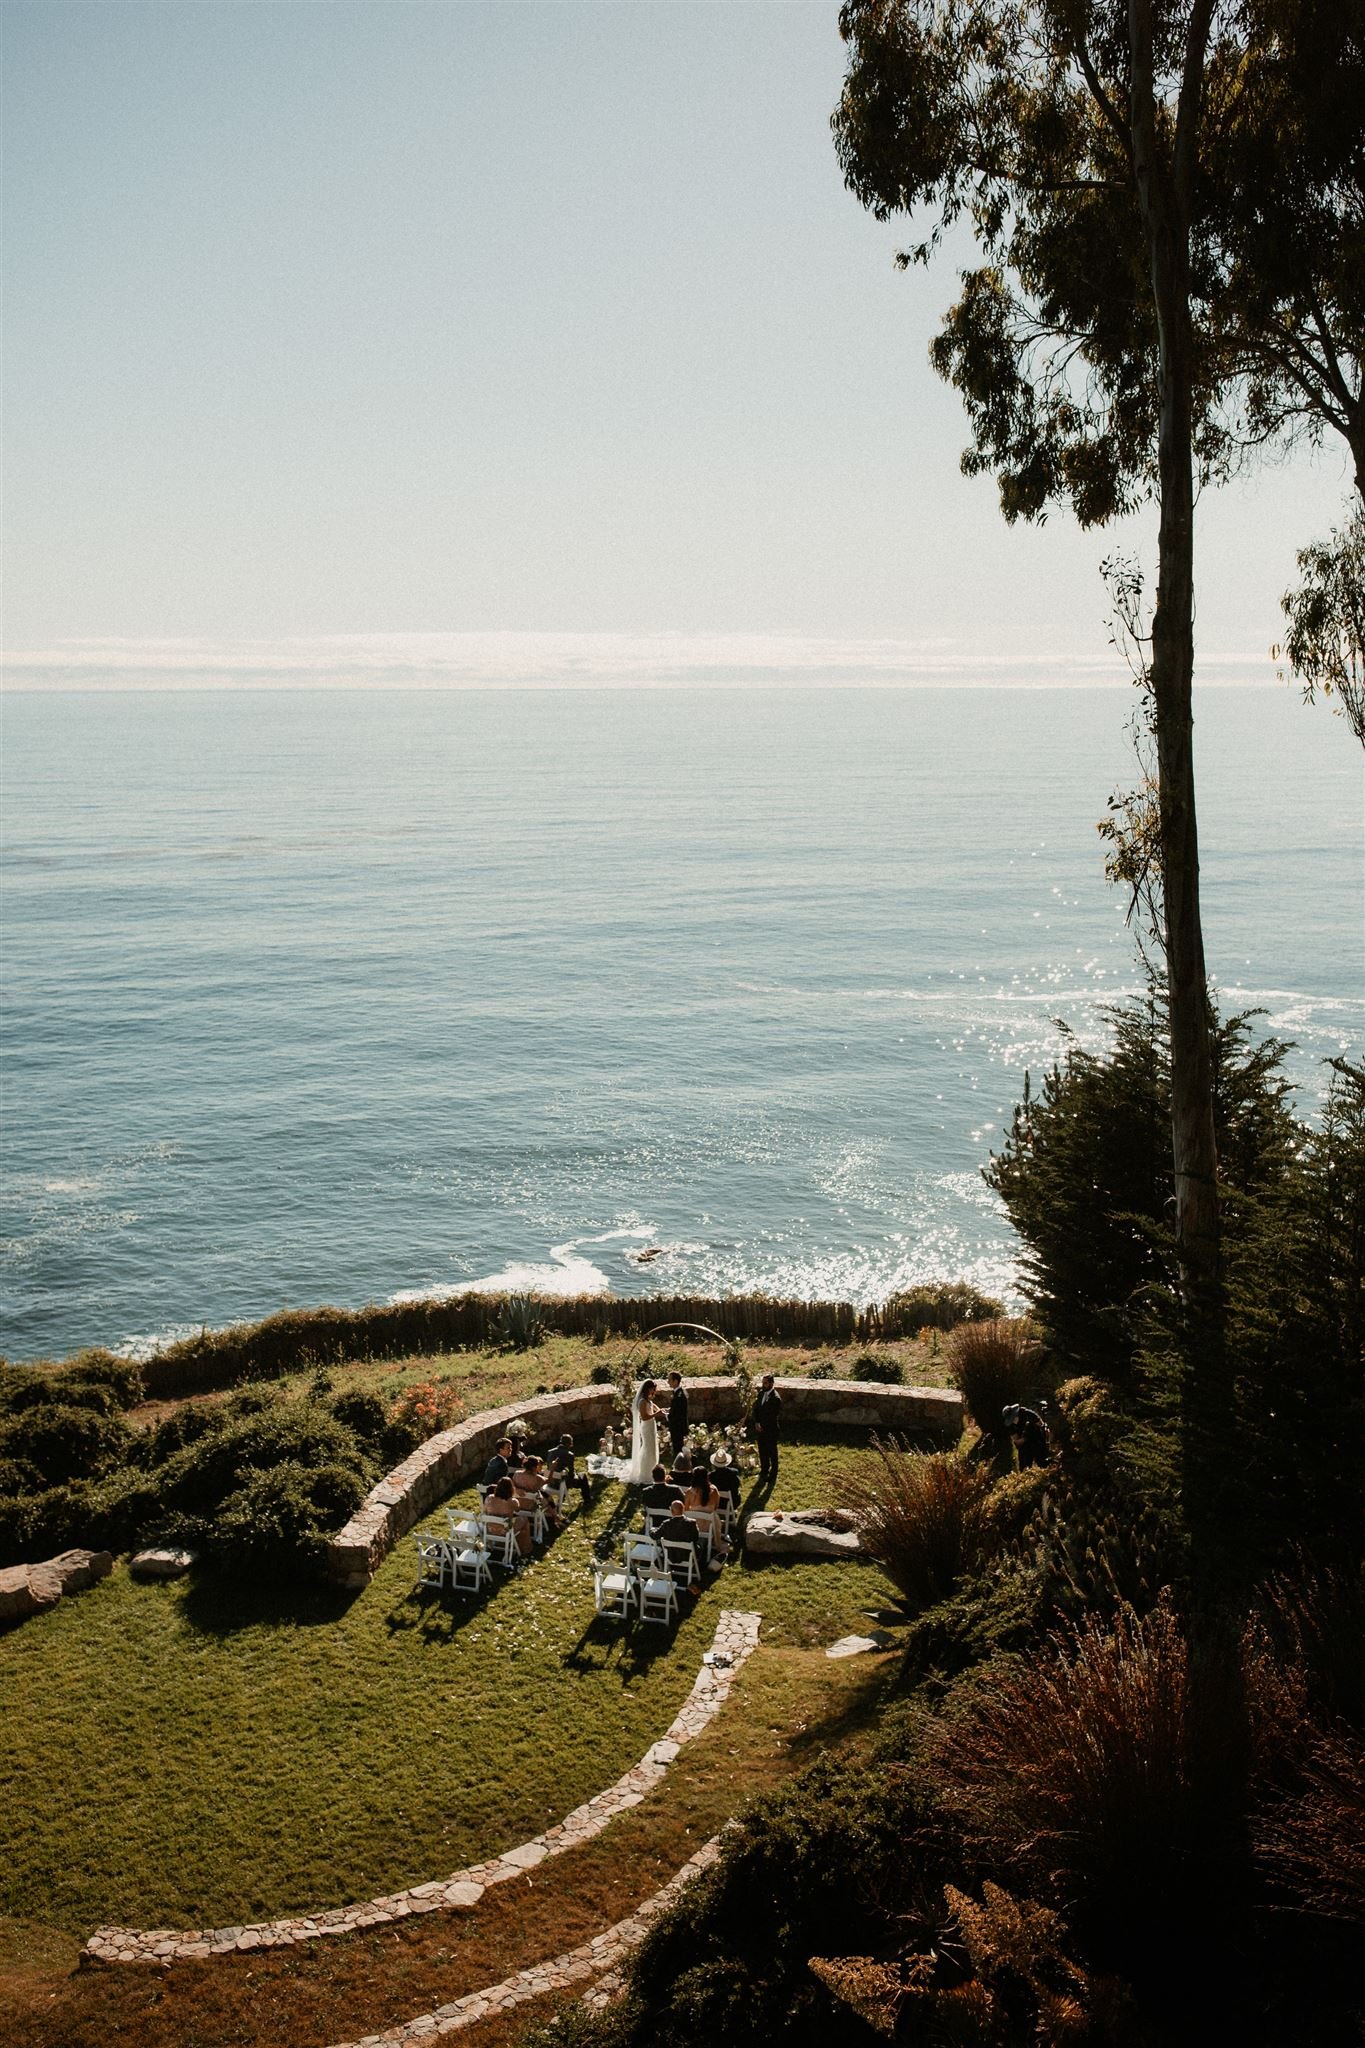 32-How-to-elope-in-Big-Sur-by-Will-Khoury.jpg